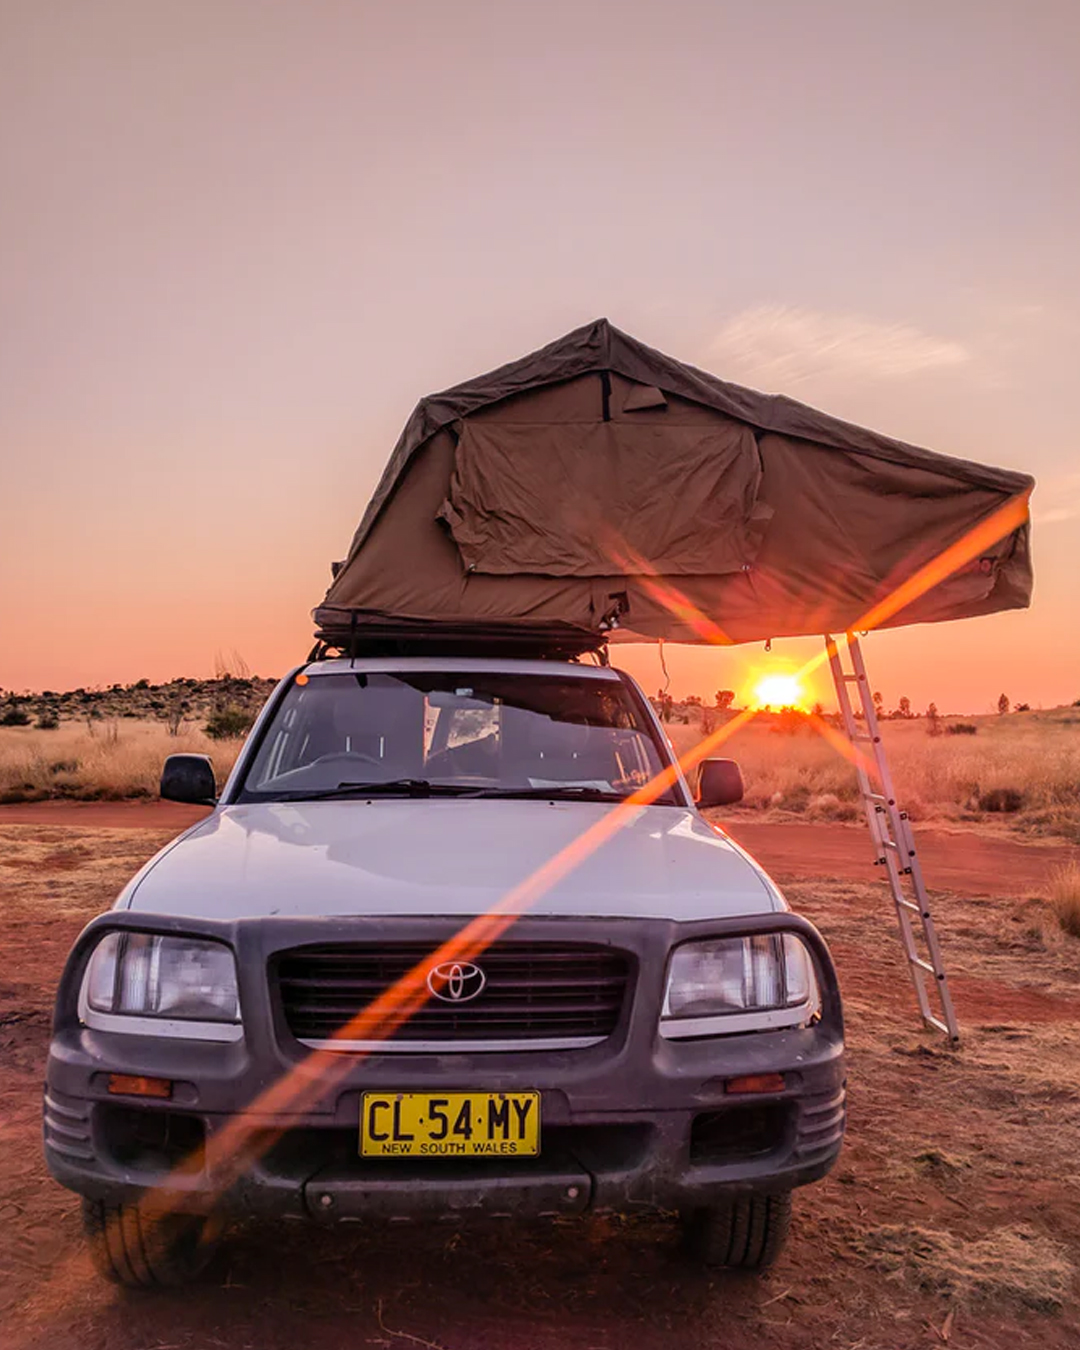 four wheel drive with overhead camping set up at sunset in Australian outback